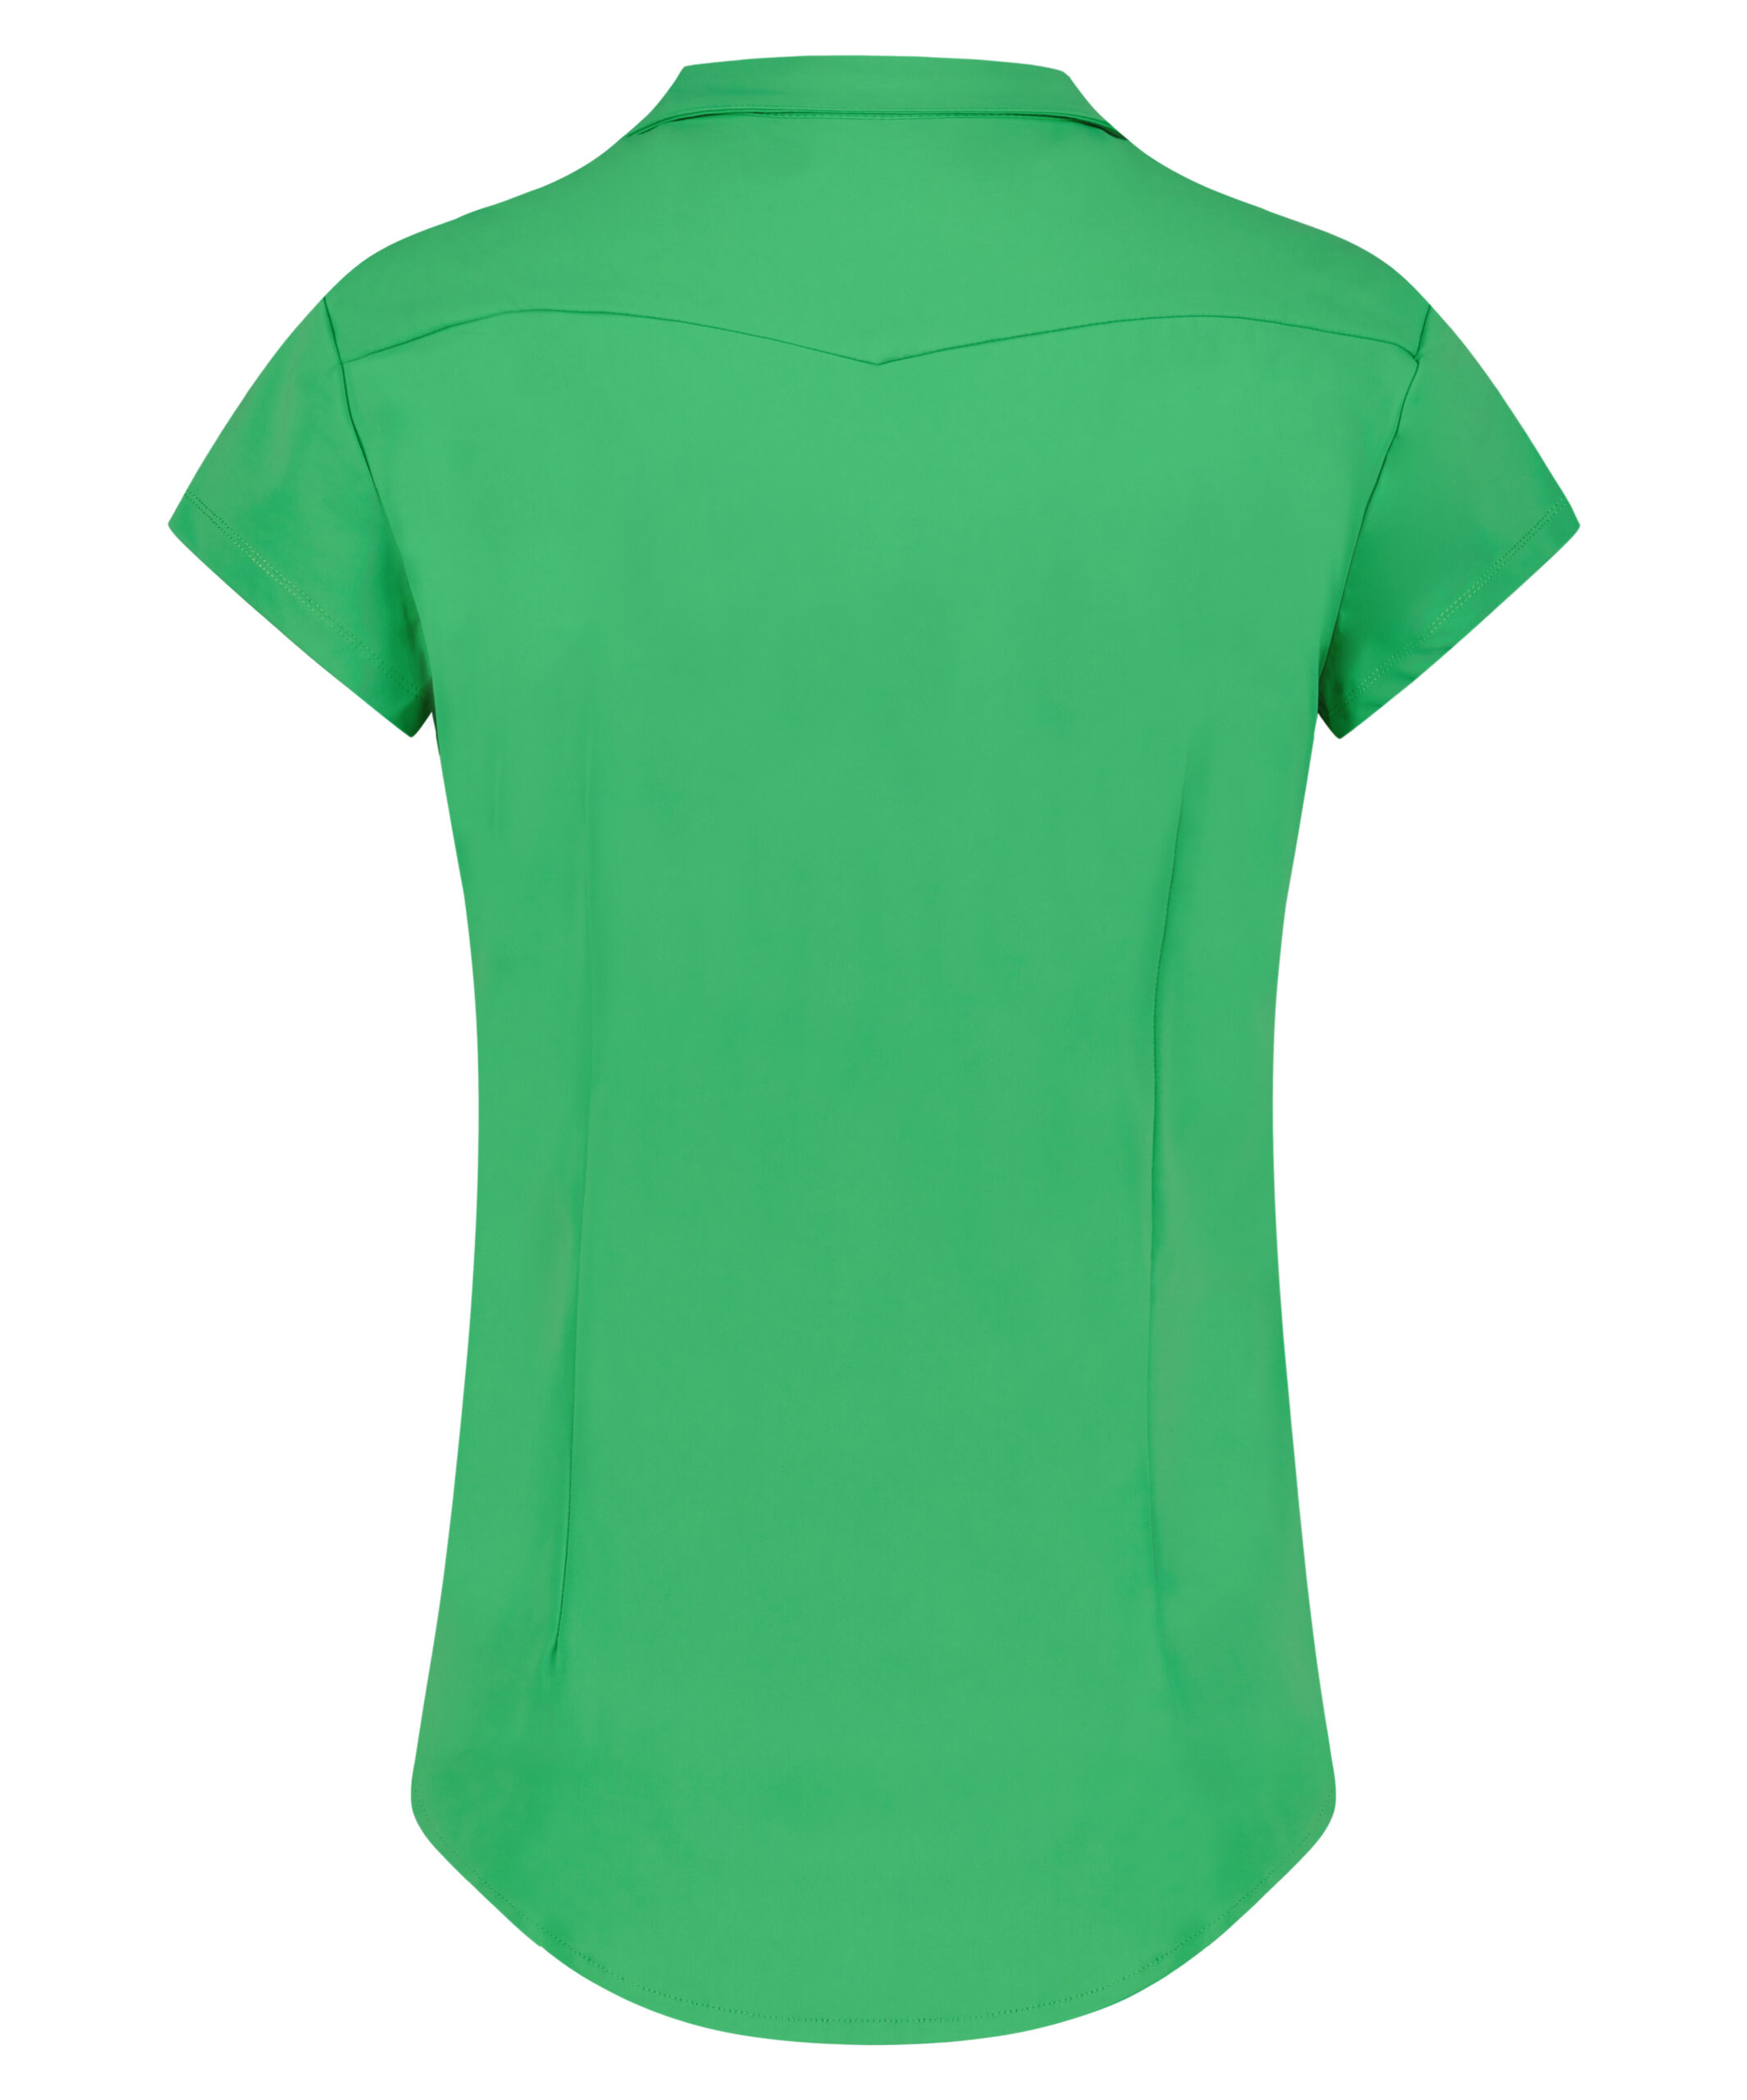 Lady Day blouse Suzy Cap Island Green